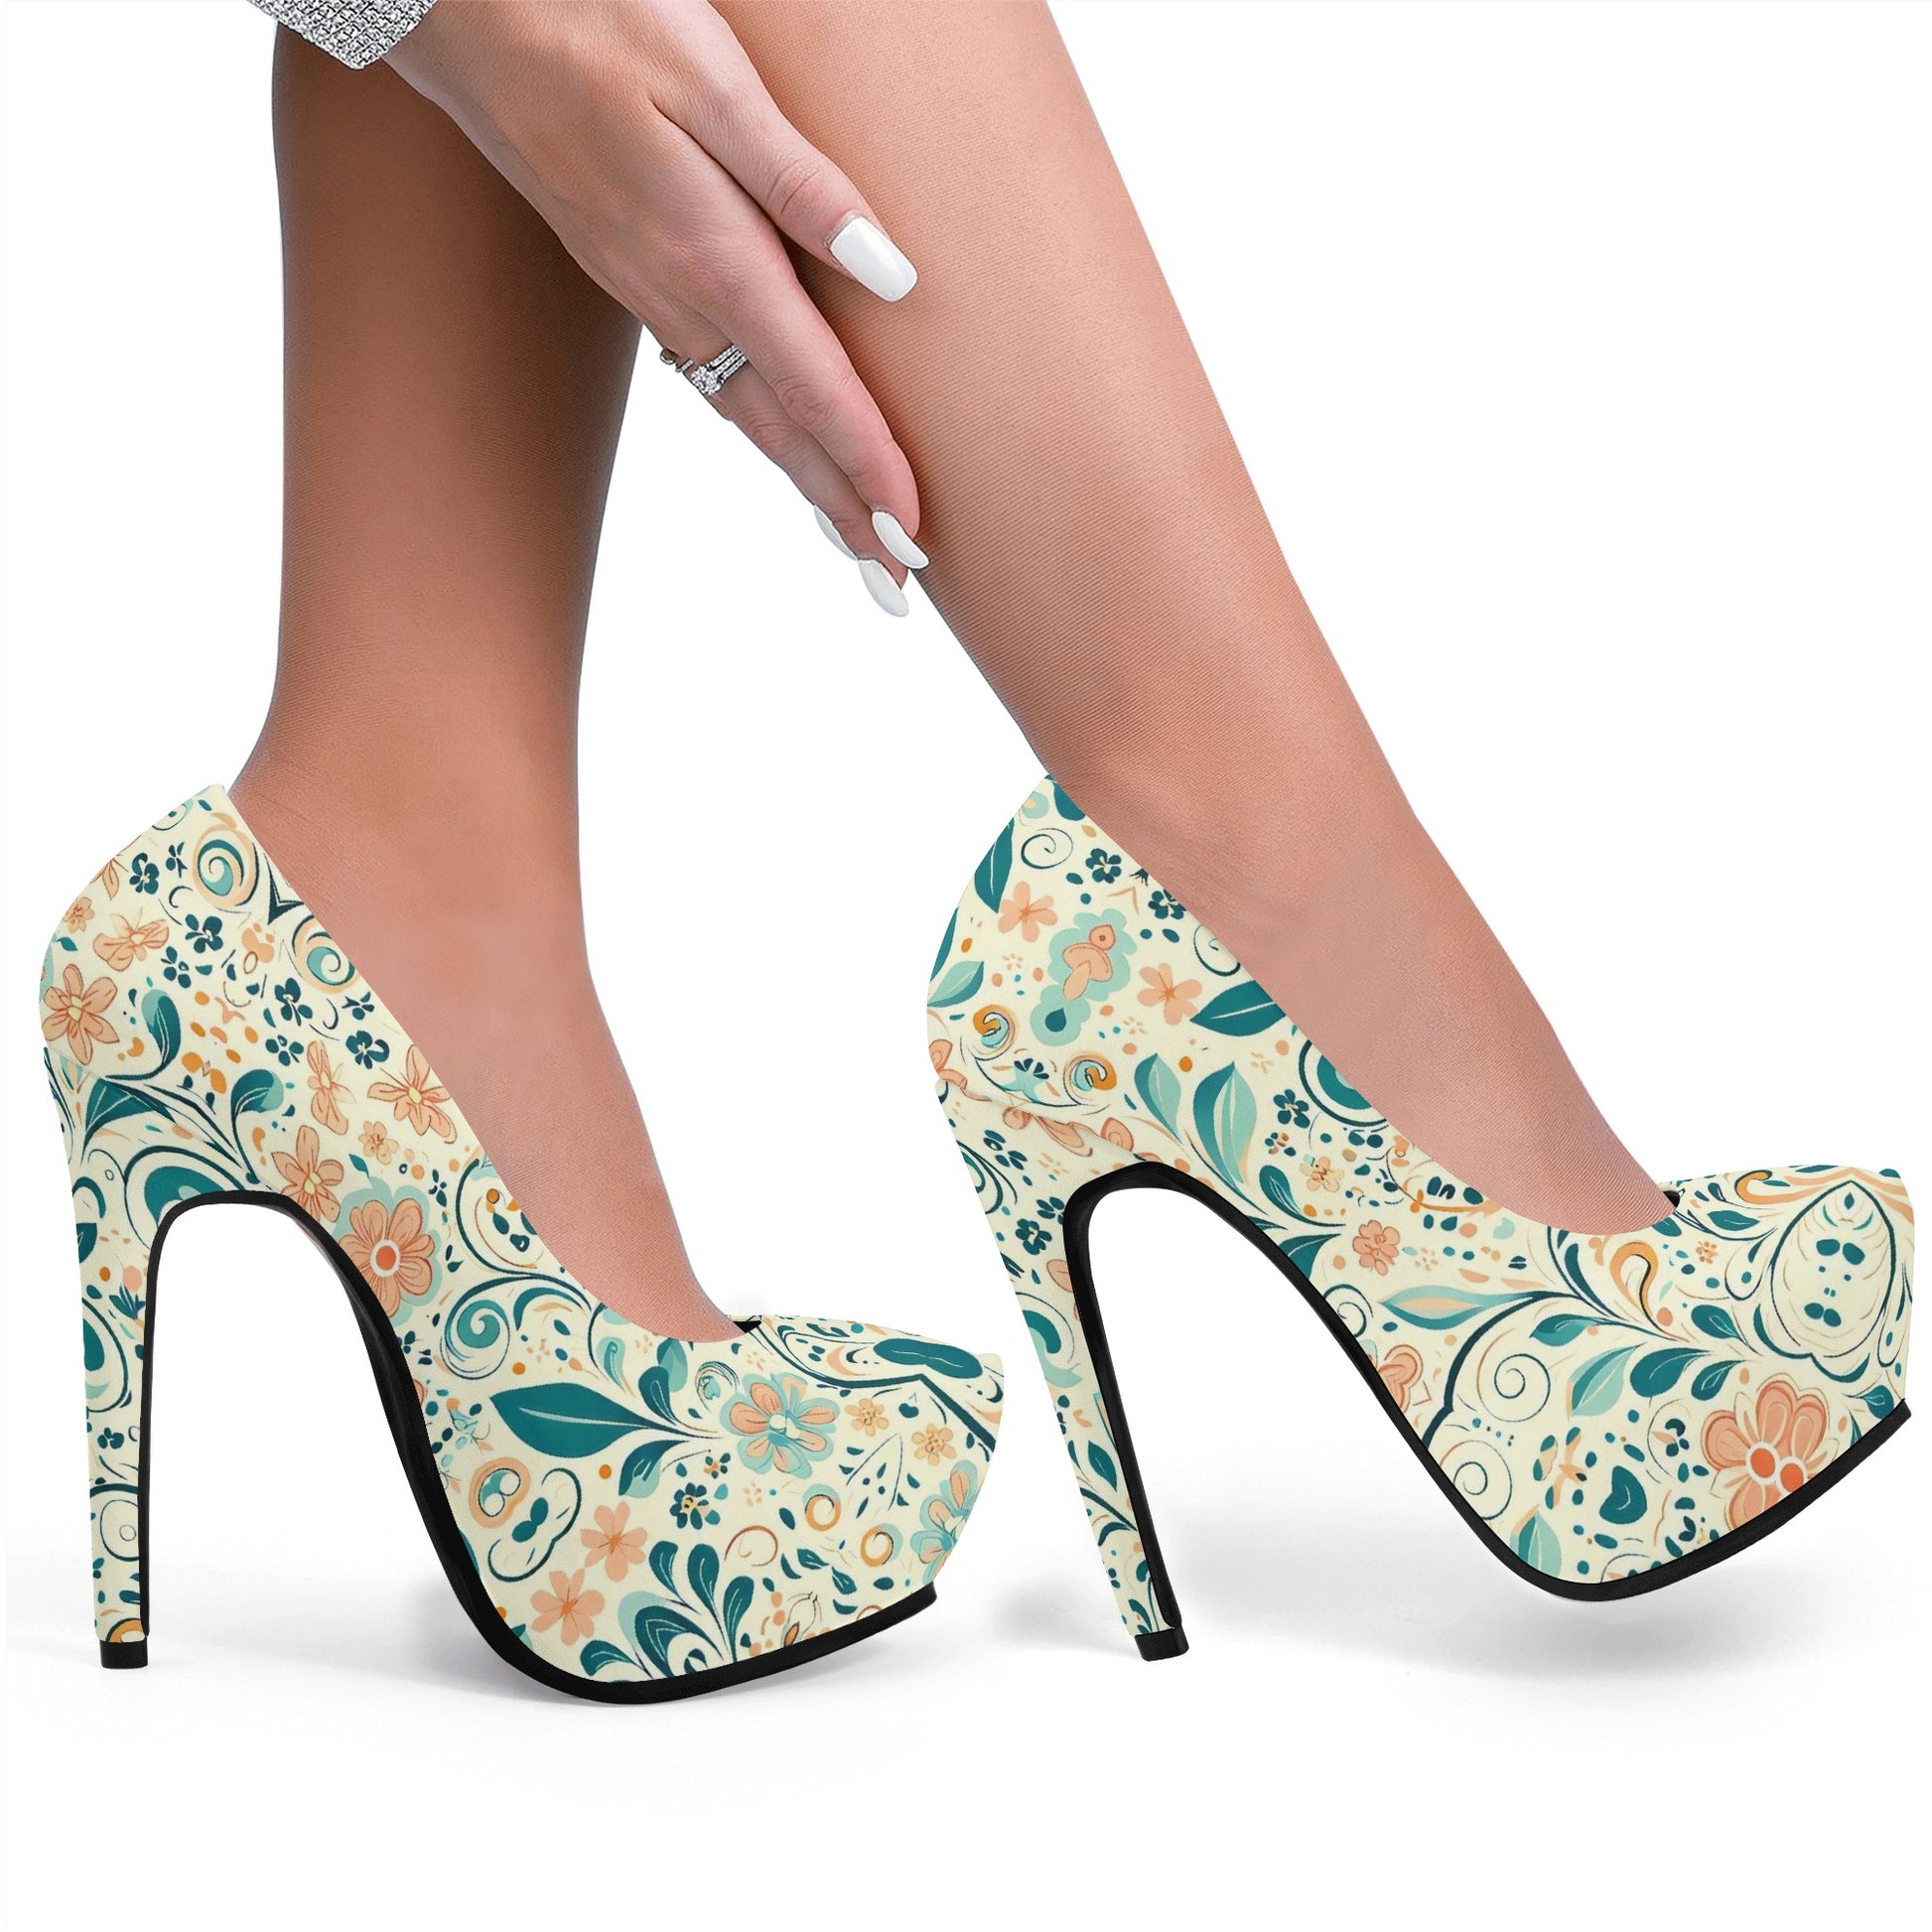 Glamorous Heights: Fashionable Confidence with High Heels